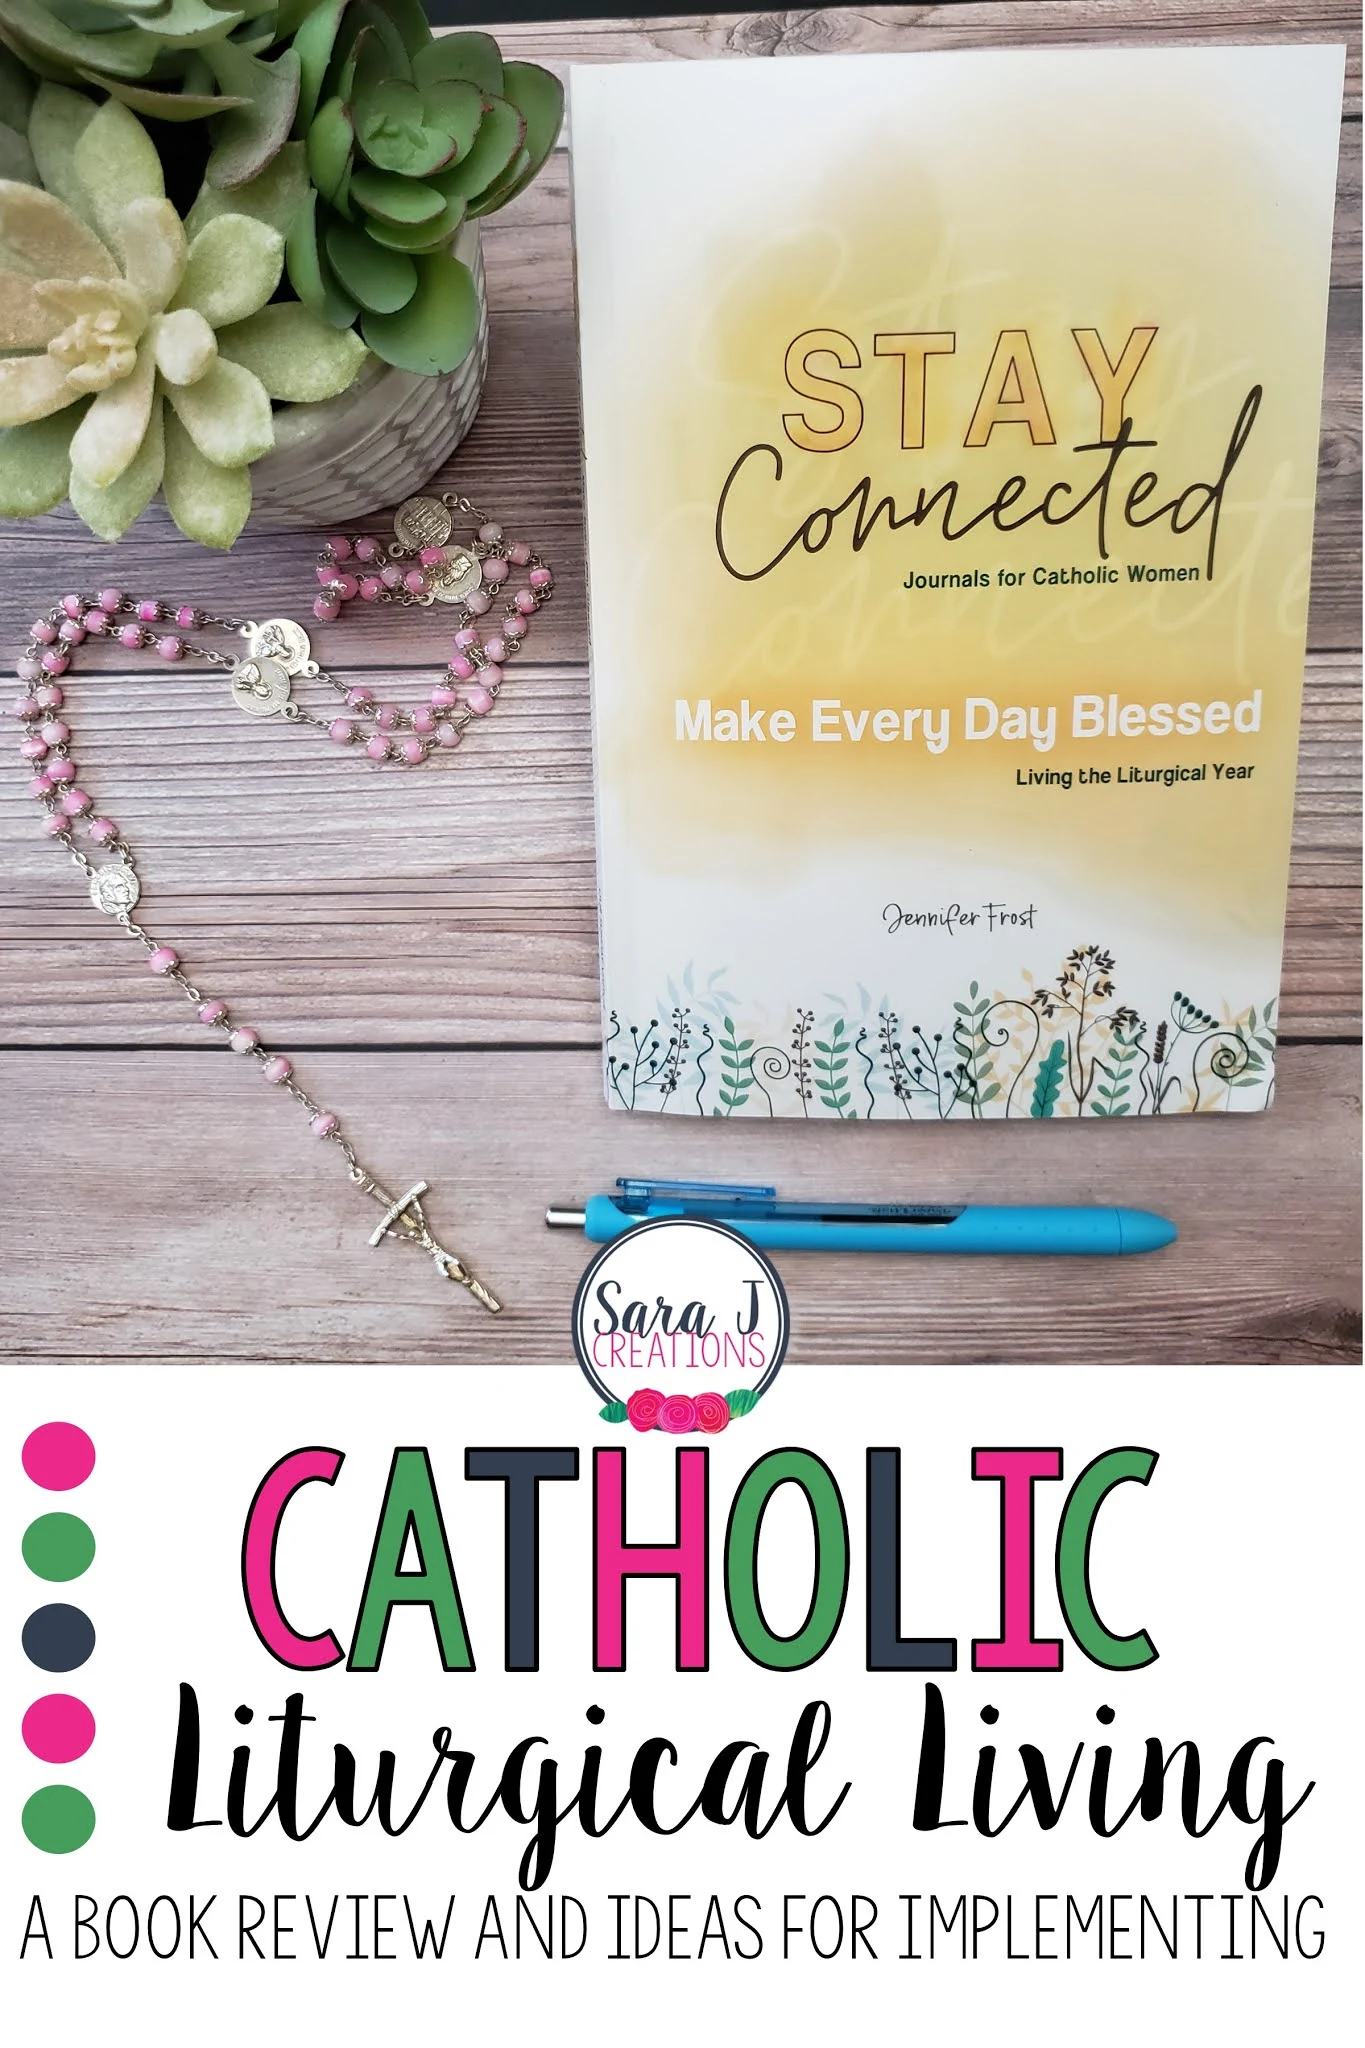 Living liturgically in the Catholic faith doesn't have to be hard or overwhelming. Check out this book review for more ideas on how you can reflect on the liturgical season through scripture, prayer, and pondering and get simple ideas for adding more intentional celebrating into your house.